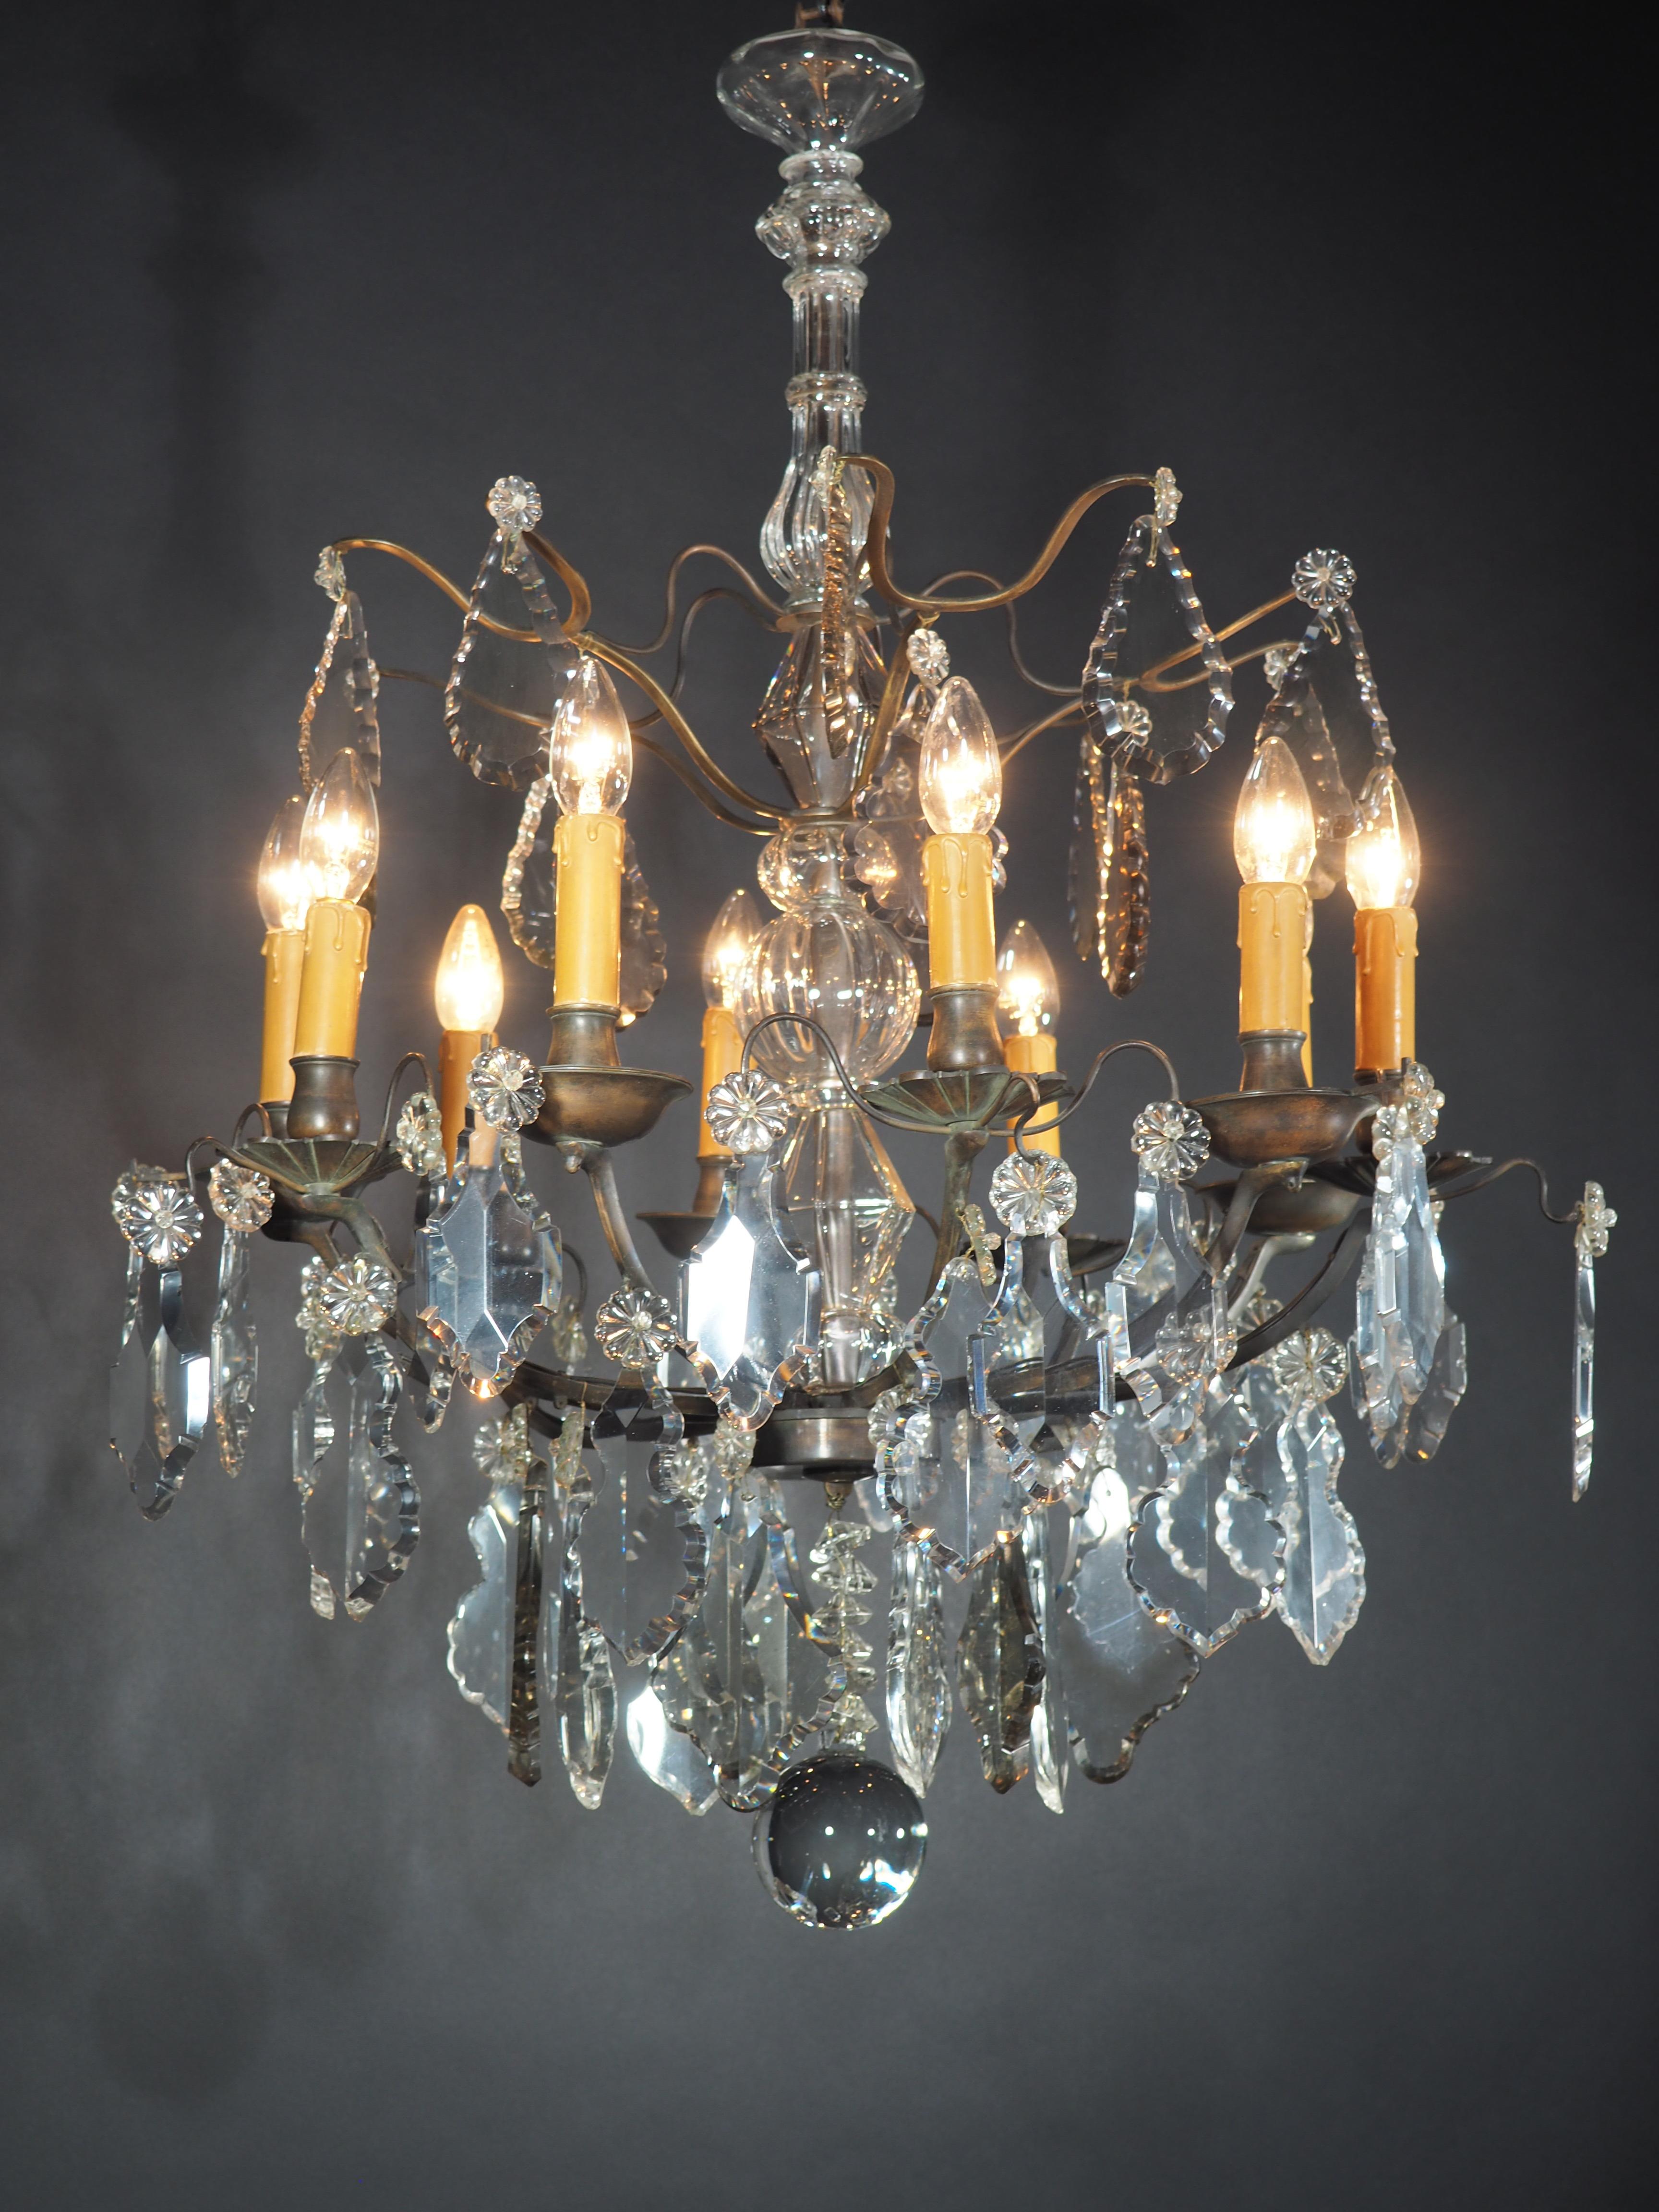 A wonderful Louis XV ten-light  crystal chandelier attributed to Baccarat, France, circa 1880s.
This beautiful chandelier is made of dark bronze suspended with big crystal prism in three different colors ( amethyst, smoke and clear) and has been